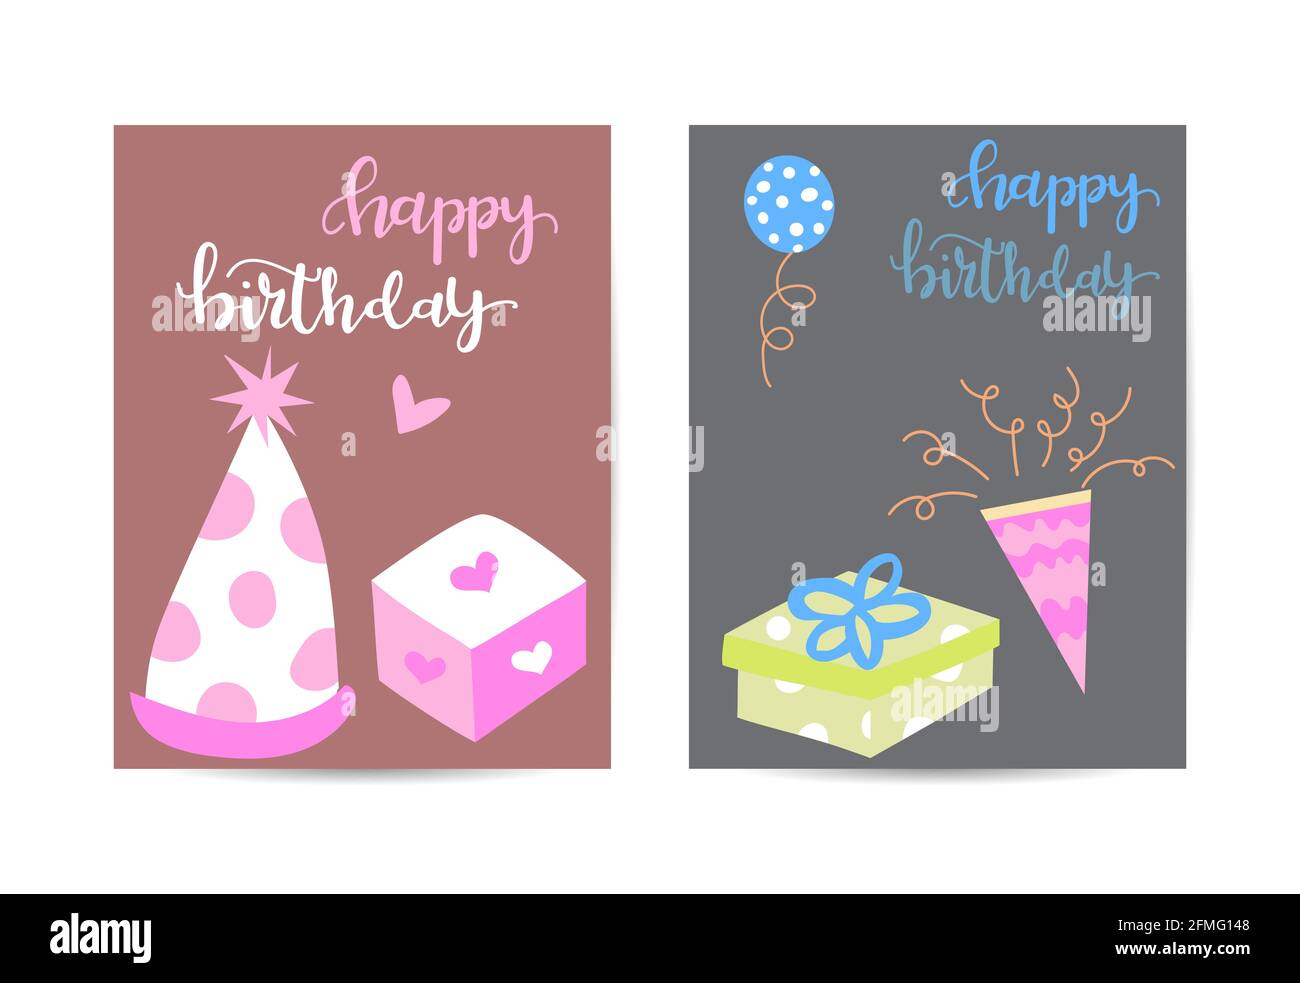 birthday greeting and invitation card. there are teddy bear, gift boxes, confetti, cup cake. layout template in A4 size. vector illustration Stock Vector